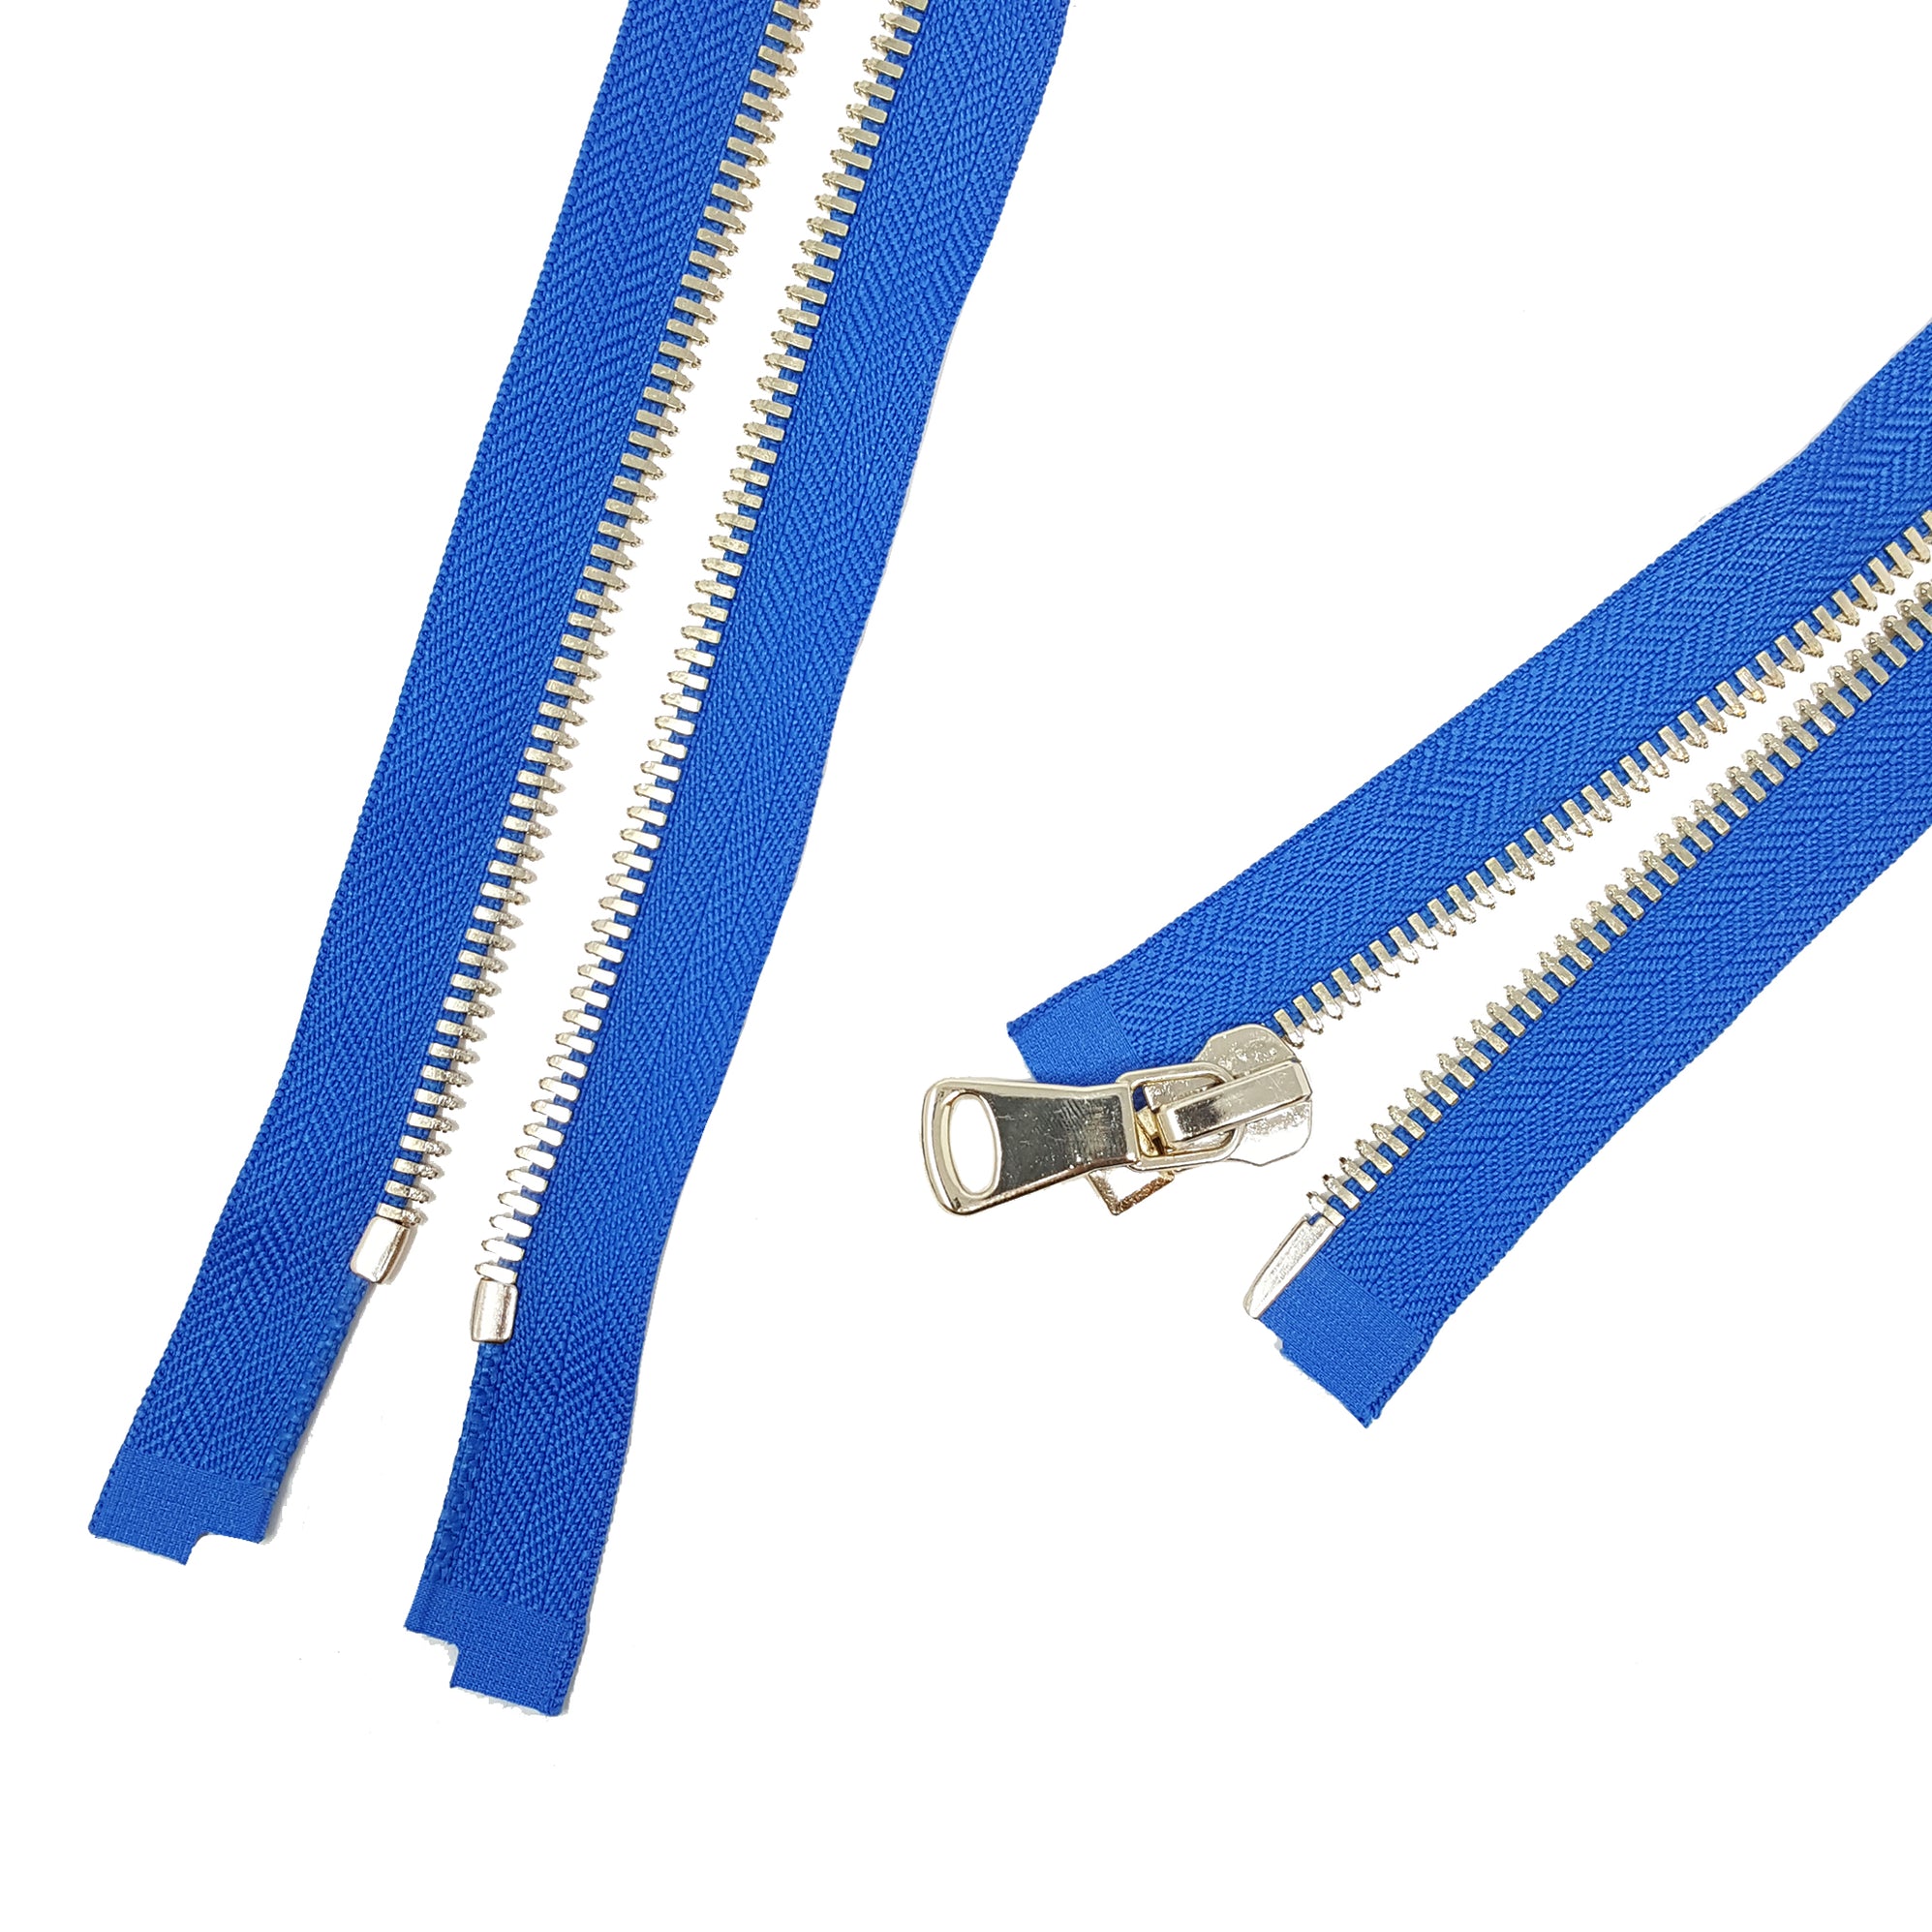 Glossy 5MM or 8MM One-Way Separating Open Bottom Zipper, Blue/Brass ...